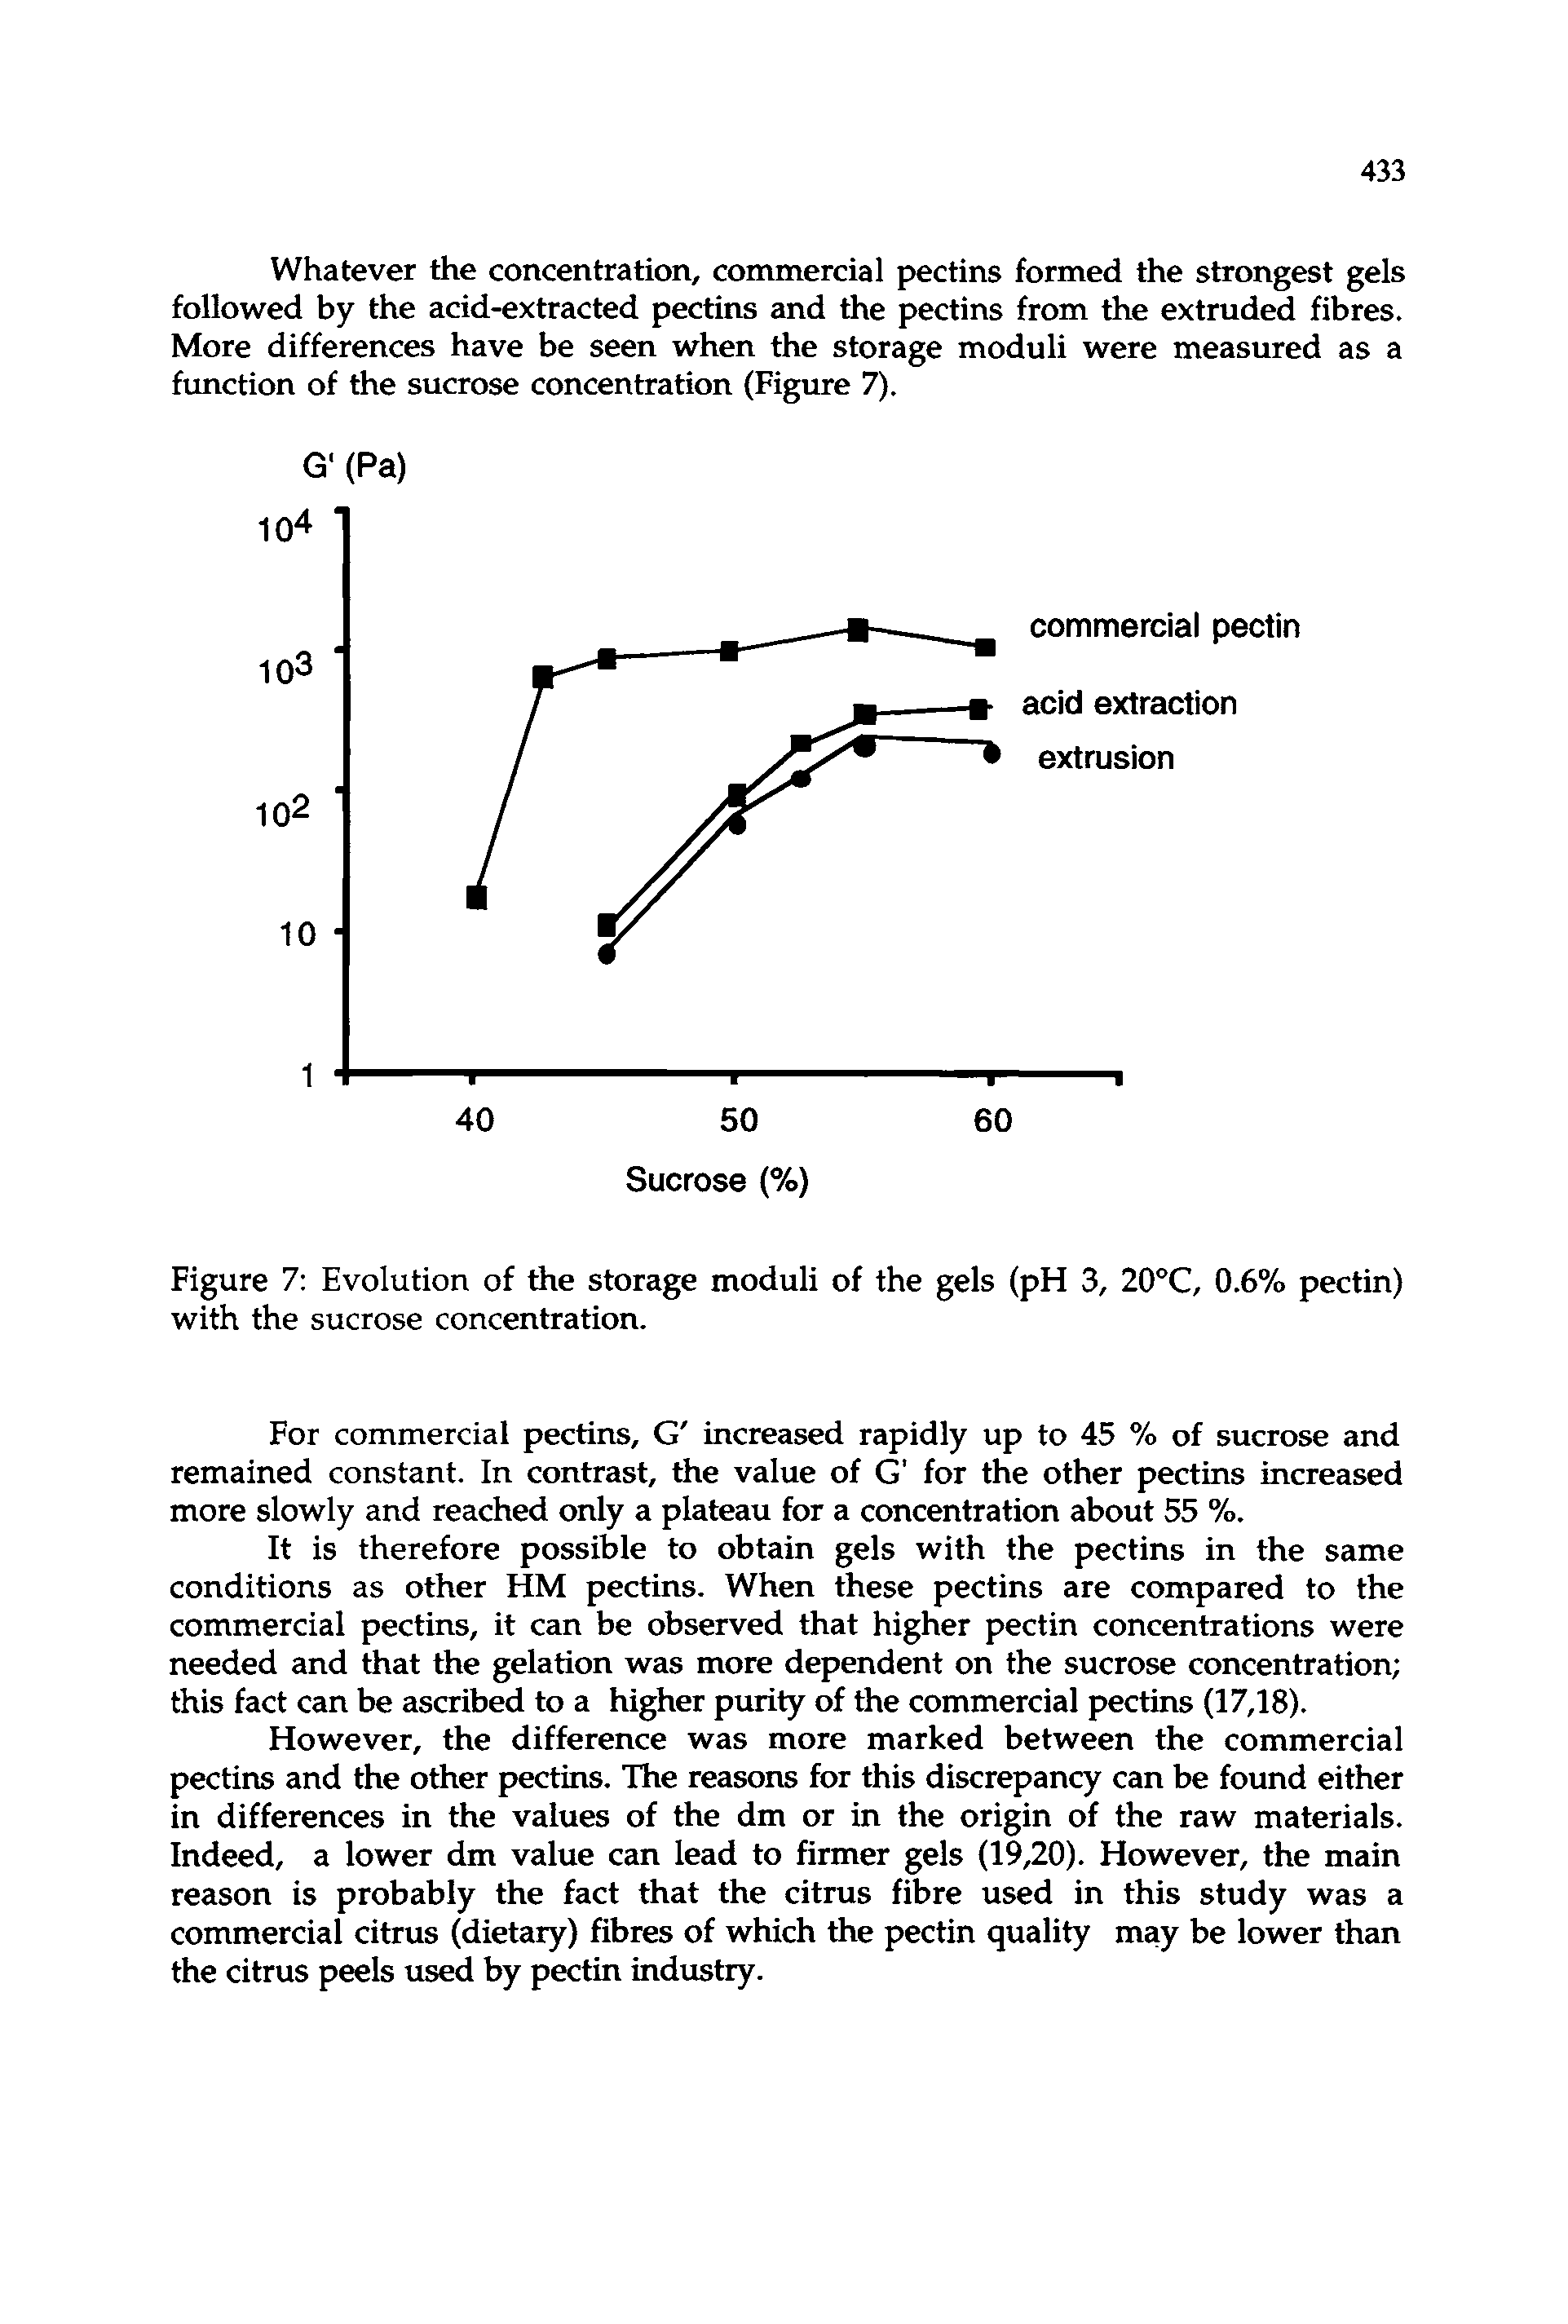 Figure 7 Evolution of the storage moduli of the gels (pH 3, 20°C, 0.6% pectin) with the sucrose concentration.